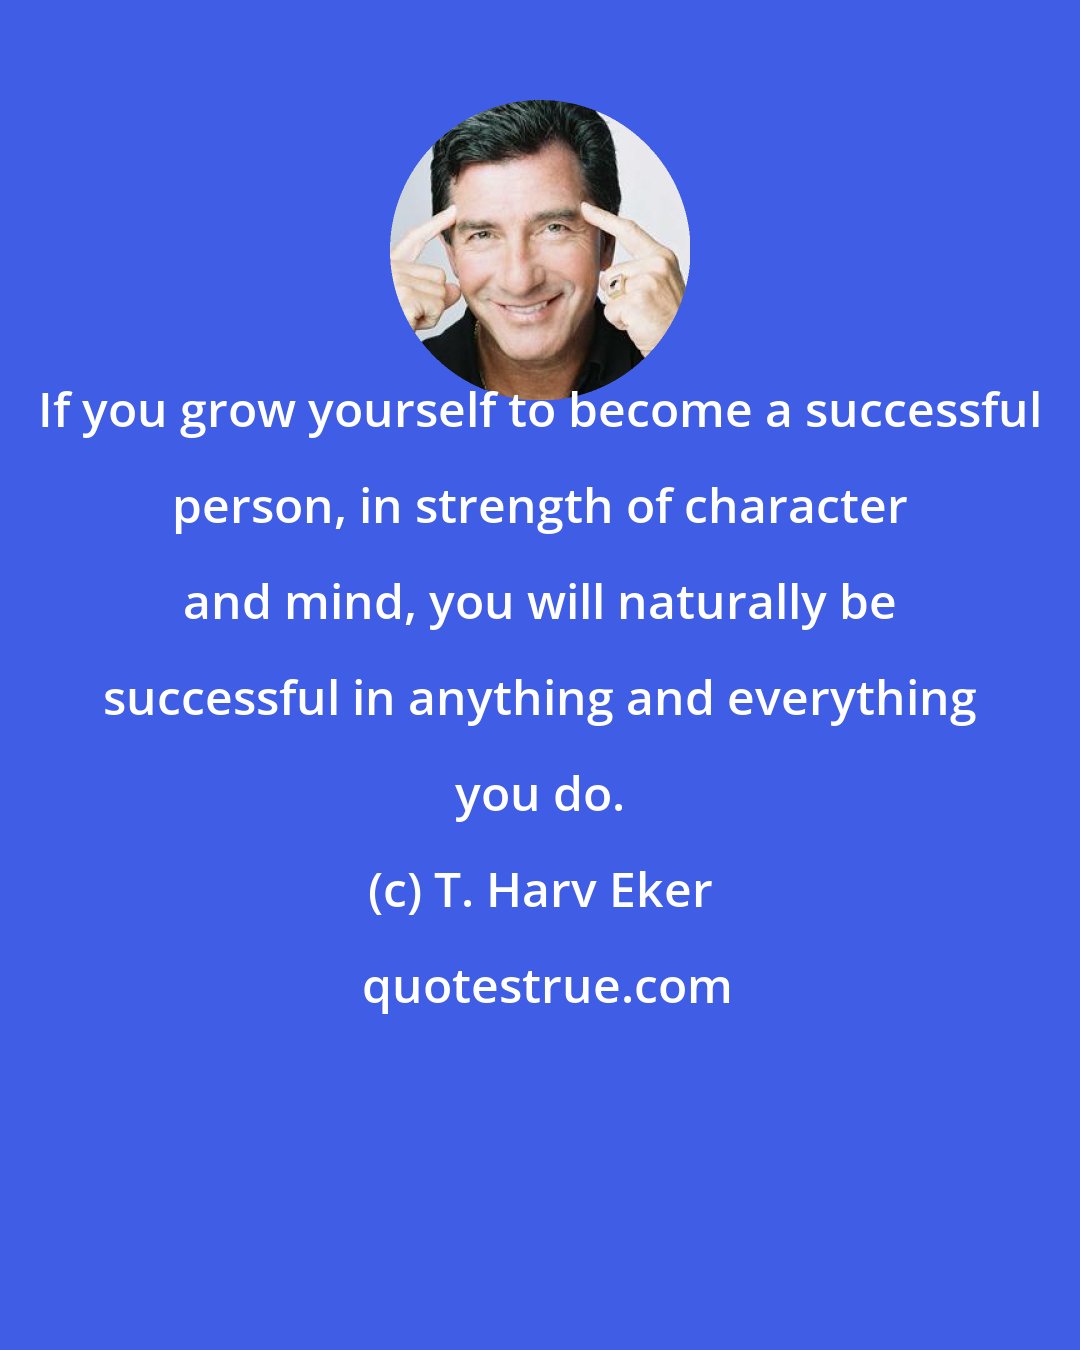 T. Harv Eker: If you grow yourself to become a successful person, in strength of character and mind, you will naturally be successful in anything and everything you do.